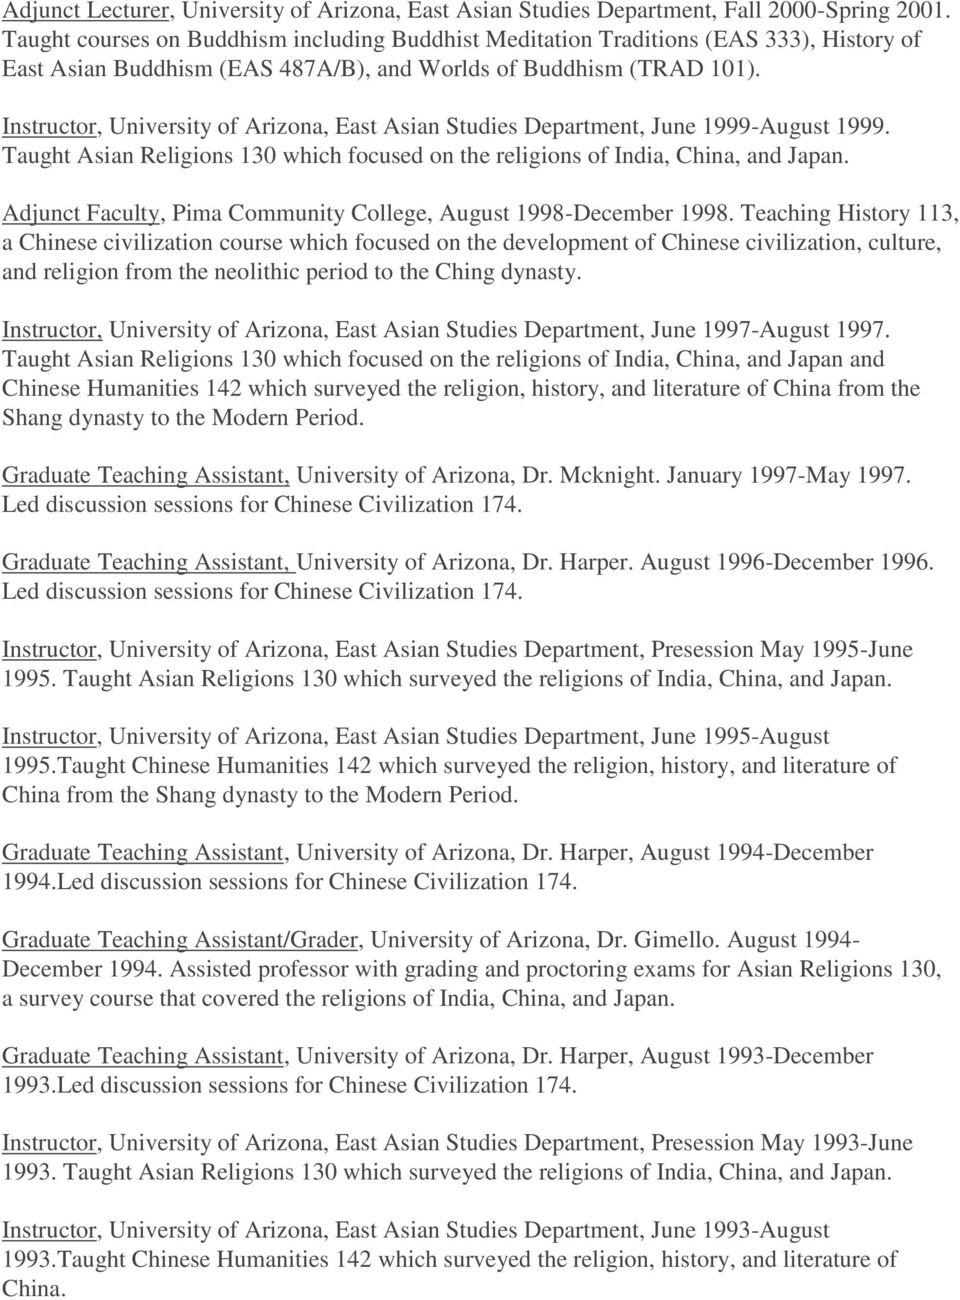 Instructor, University of Arizona, East Asian Studies Department, June 1999-August 1999. Taught Asian Religions 130 which focused on the religions of India, China, and Japan.